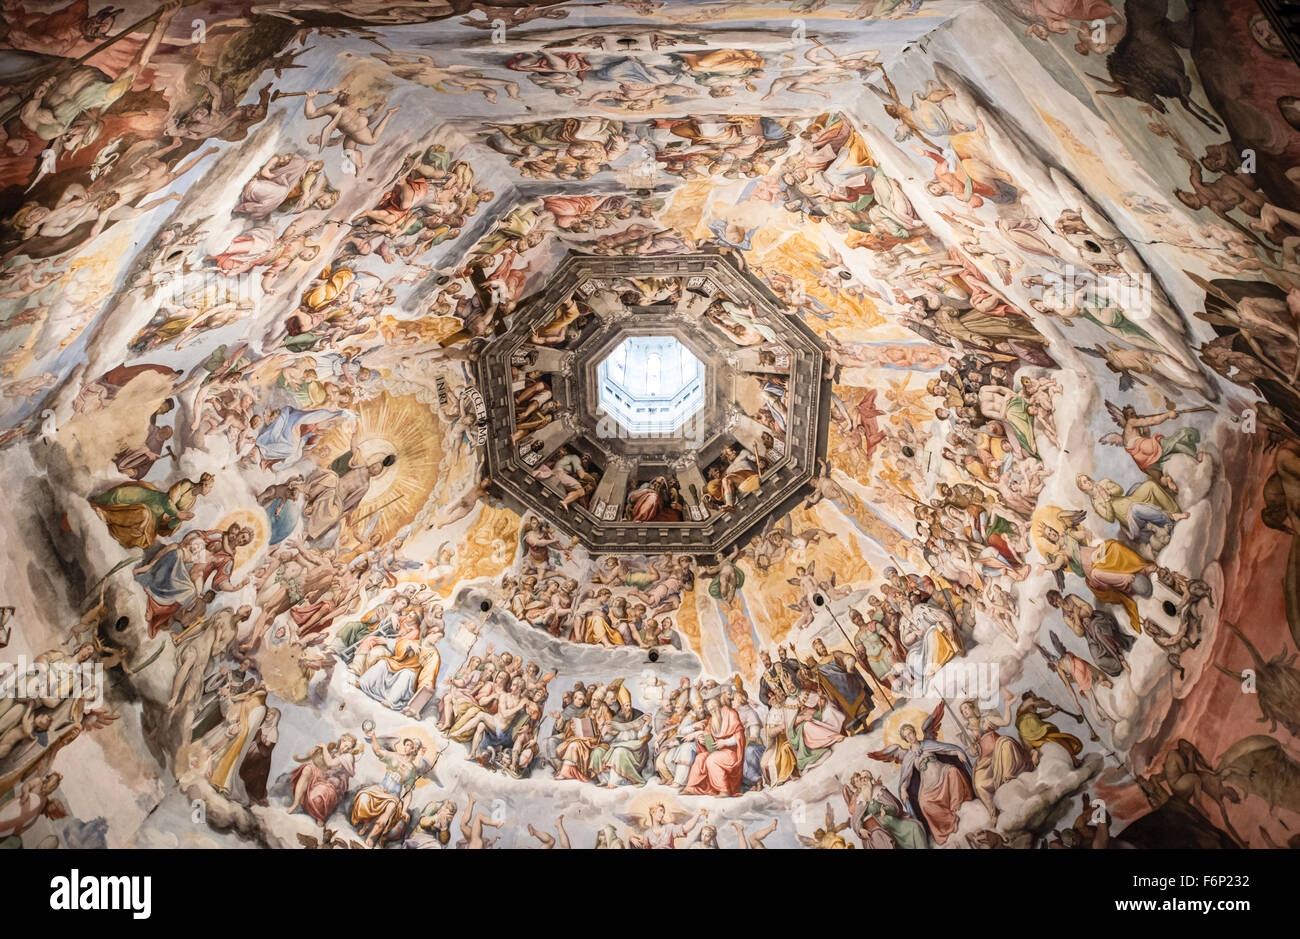 The Last Judgement Painting On The Ceiling Of The Duomo Florence